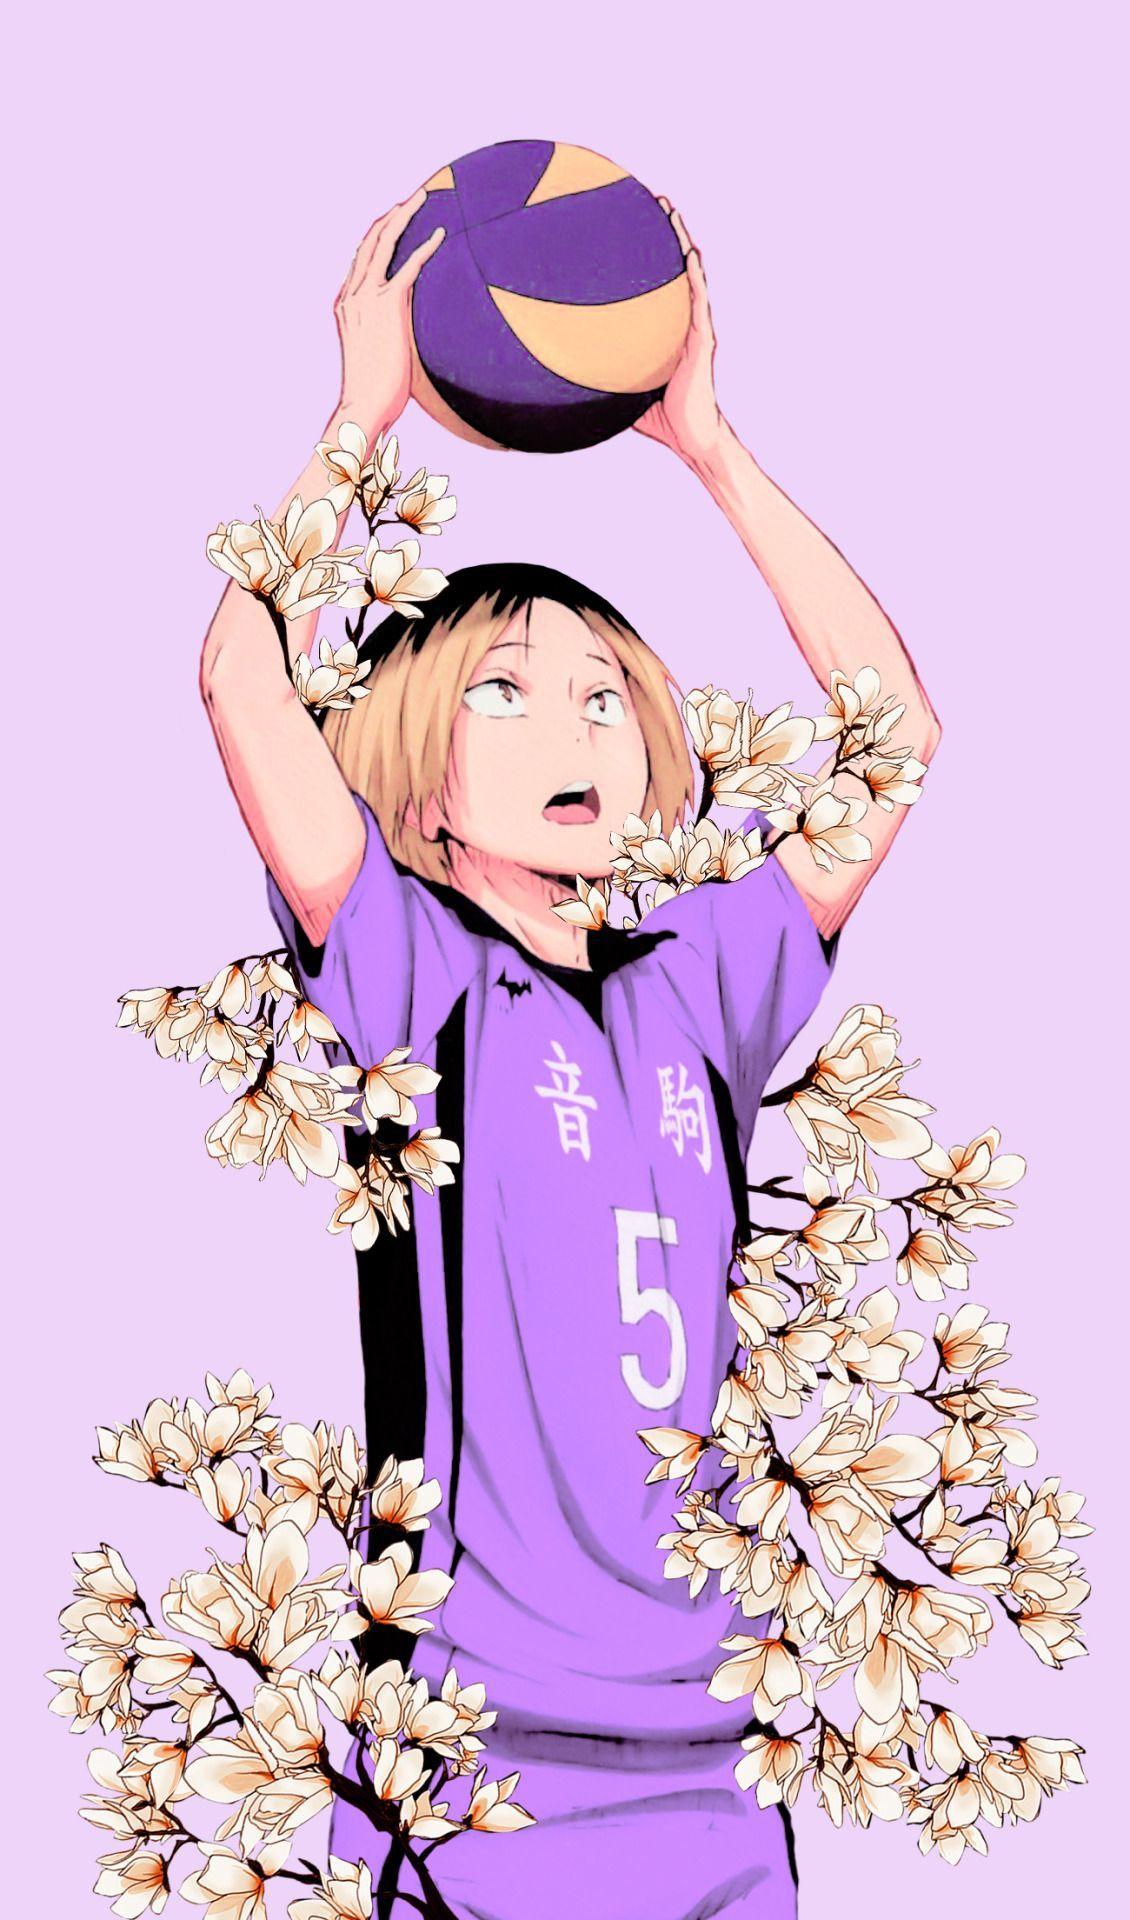 6 Kenma Kozume Wallpapers for iPhone and Android by Jessica Castillo